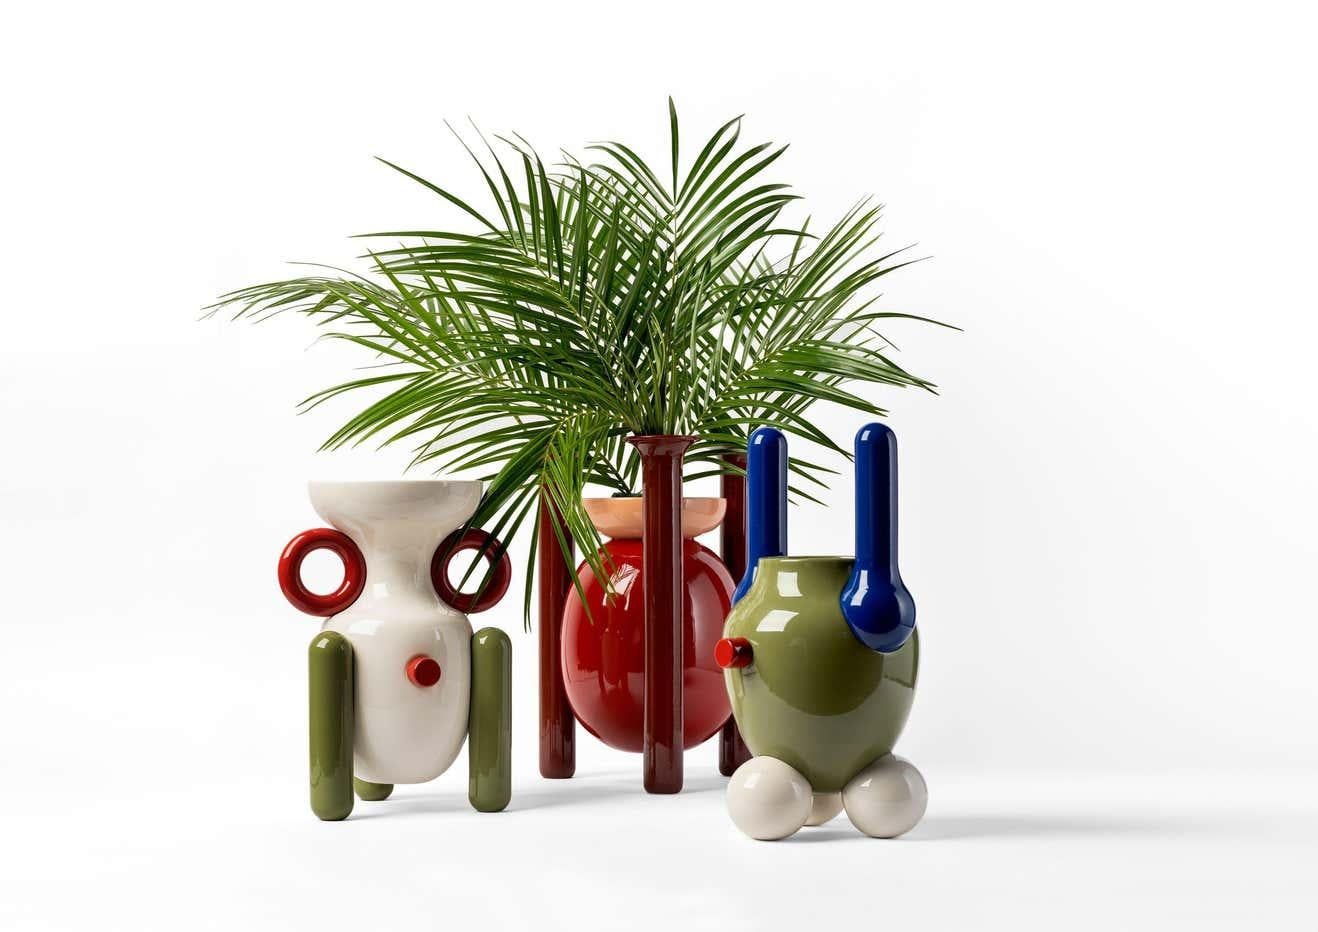 Contemporary Glazed Ceramic Explorer Vase No.2

Materials: 
Ceramic

Dimensions: 
D 25 cm x W 25 cm x H 35 cm

The Showtime Vases are just as current as when we launched them over 10 years ago. They are little decorative sculptures that